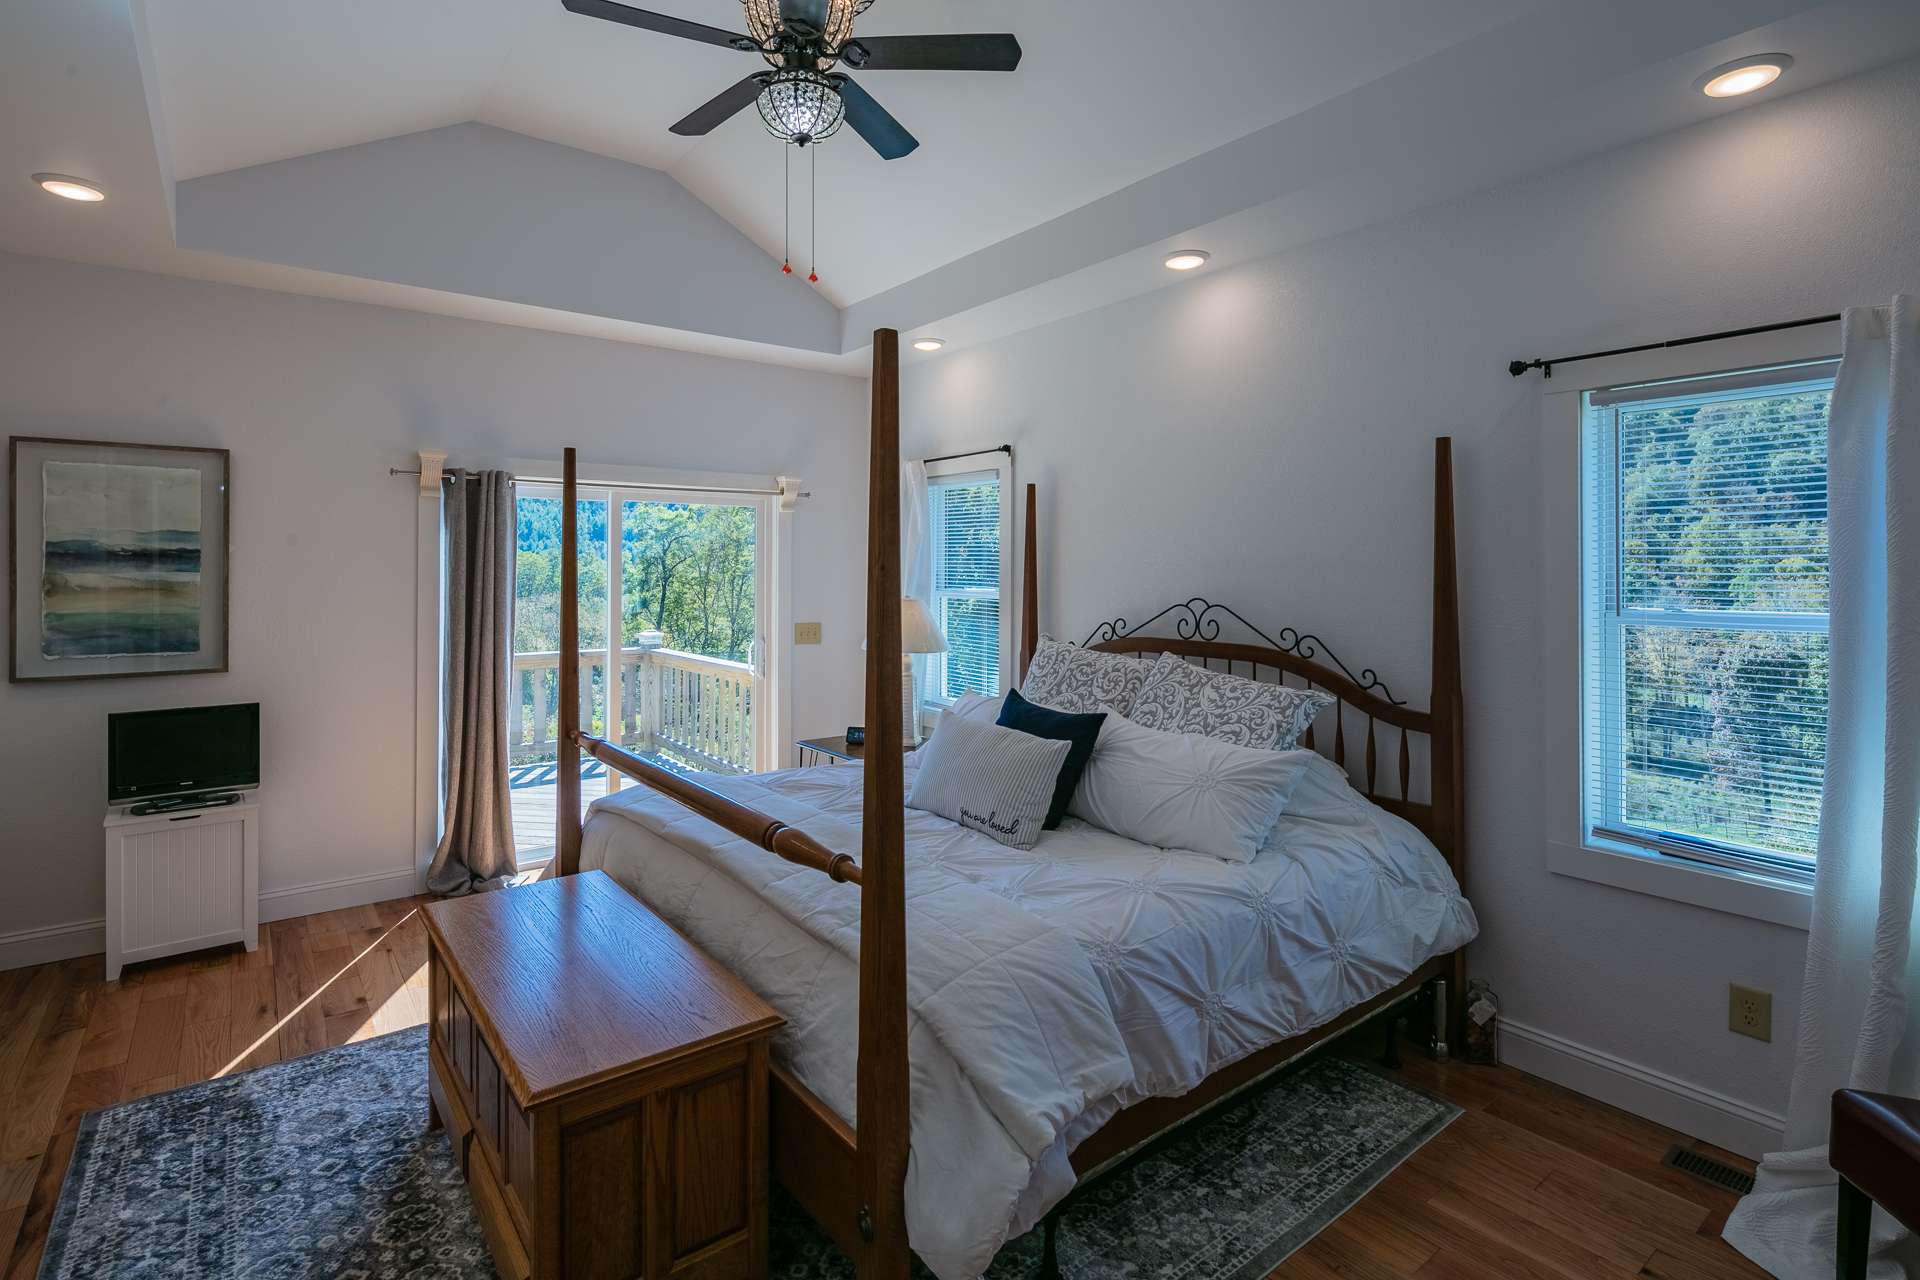 The master suite is located on the main level and offers a tray ceiling , private deck, huge walk-in closet and private bath.